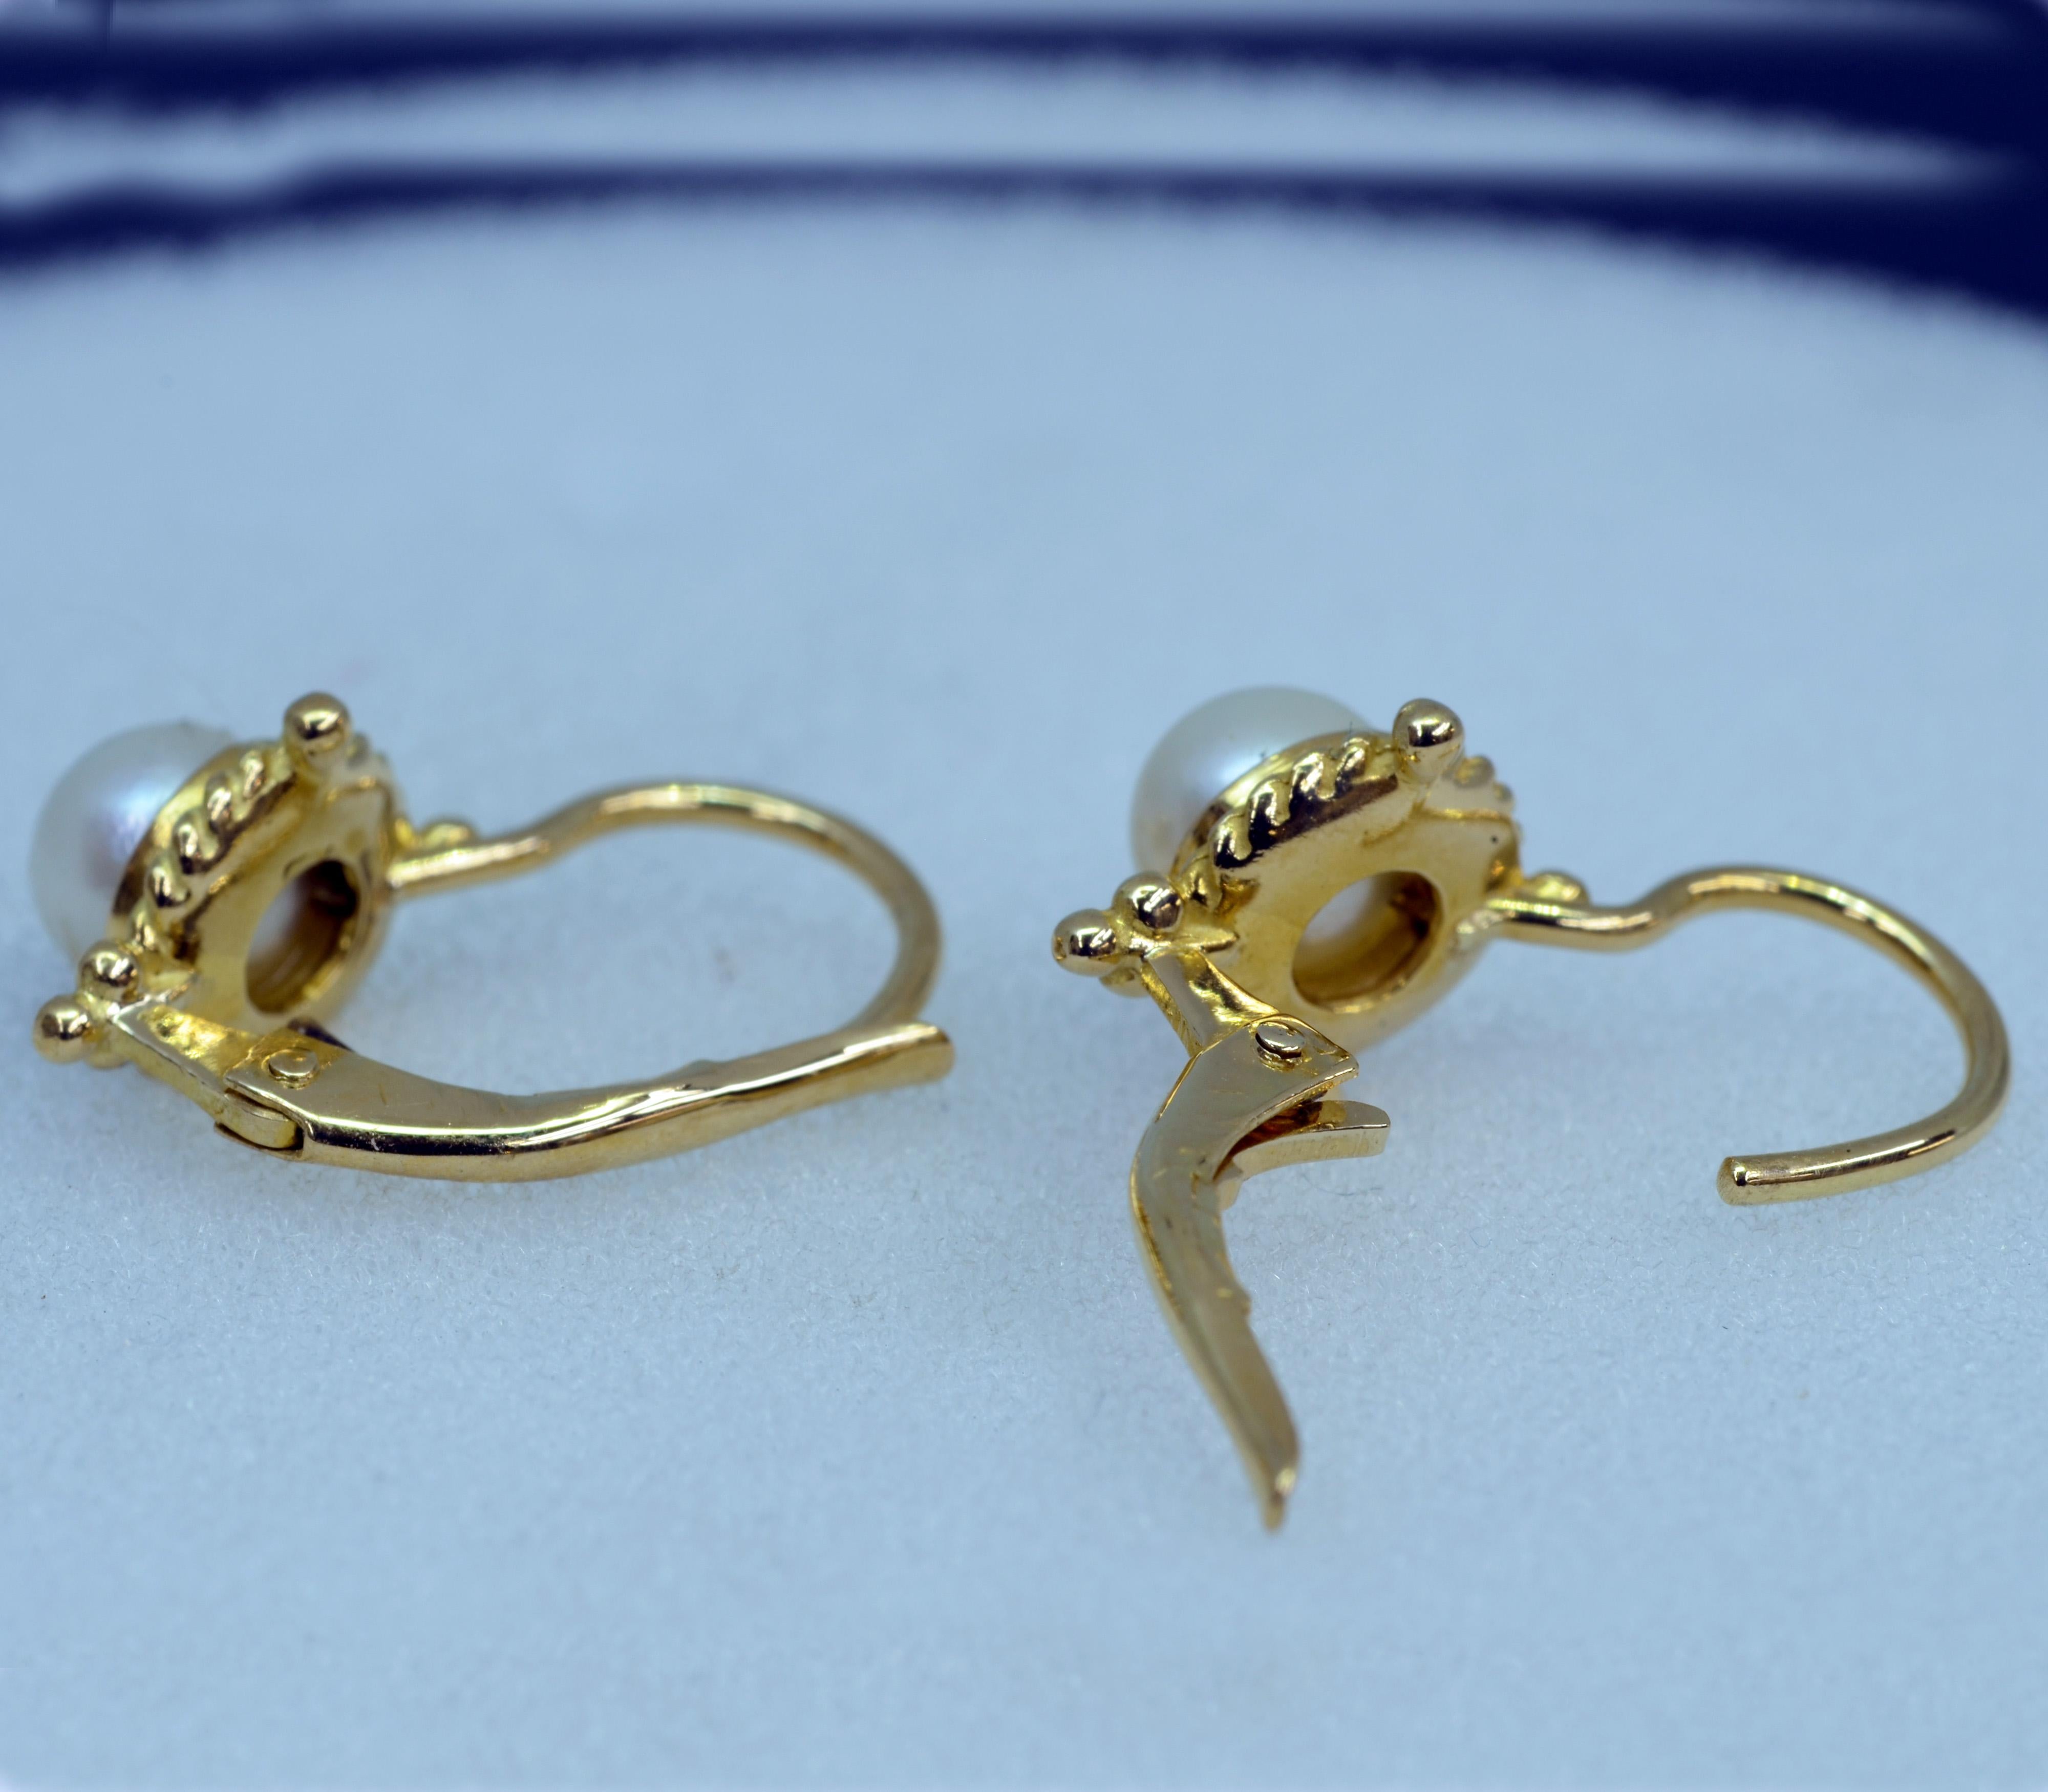 Very sweet pair of 18 Karat Yellow gold drop lever-back earrings. These are set with a pair of 5mm. round white cultured Pearls . They are accented with tiny gold beads. They are 8mm. in circumference.